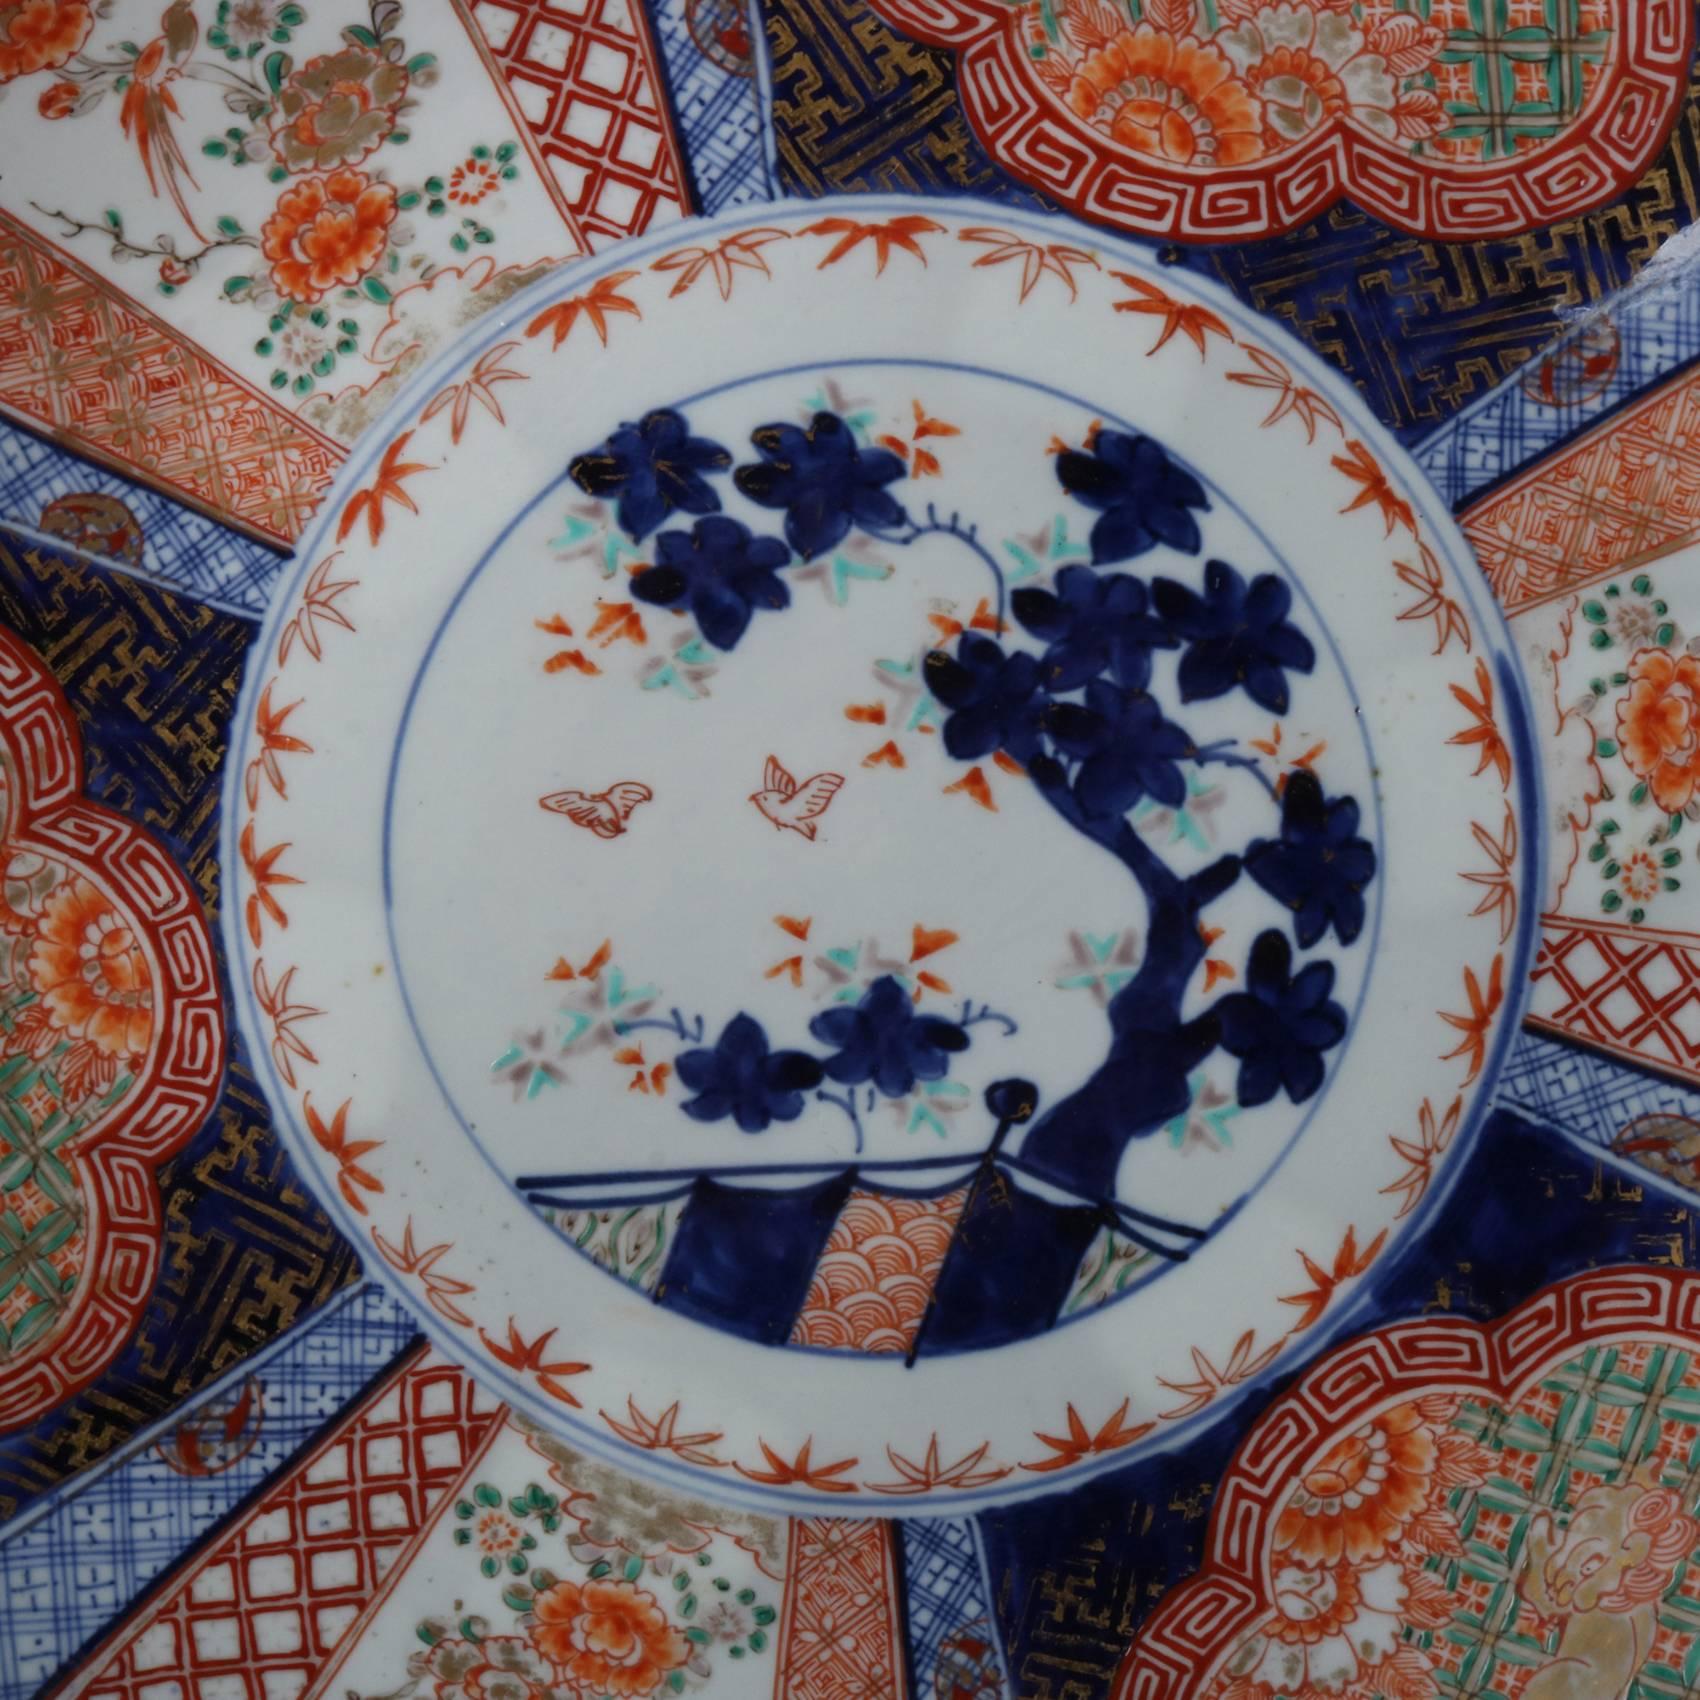 Antique Japanese Imari porcelain charger plate features hand painted and gilt central Bonsai tree, border with reserves of Asian animal figures and flowers, en verso blue decorated, 20th century

Measures - 15.5"diam x 2.5"h